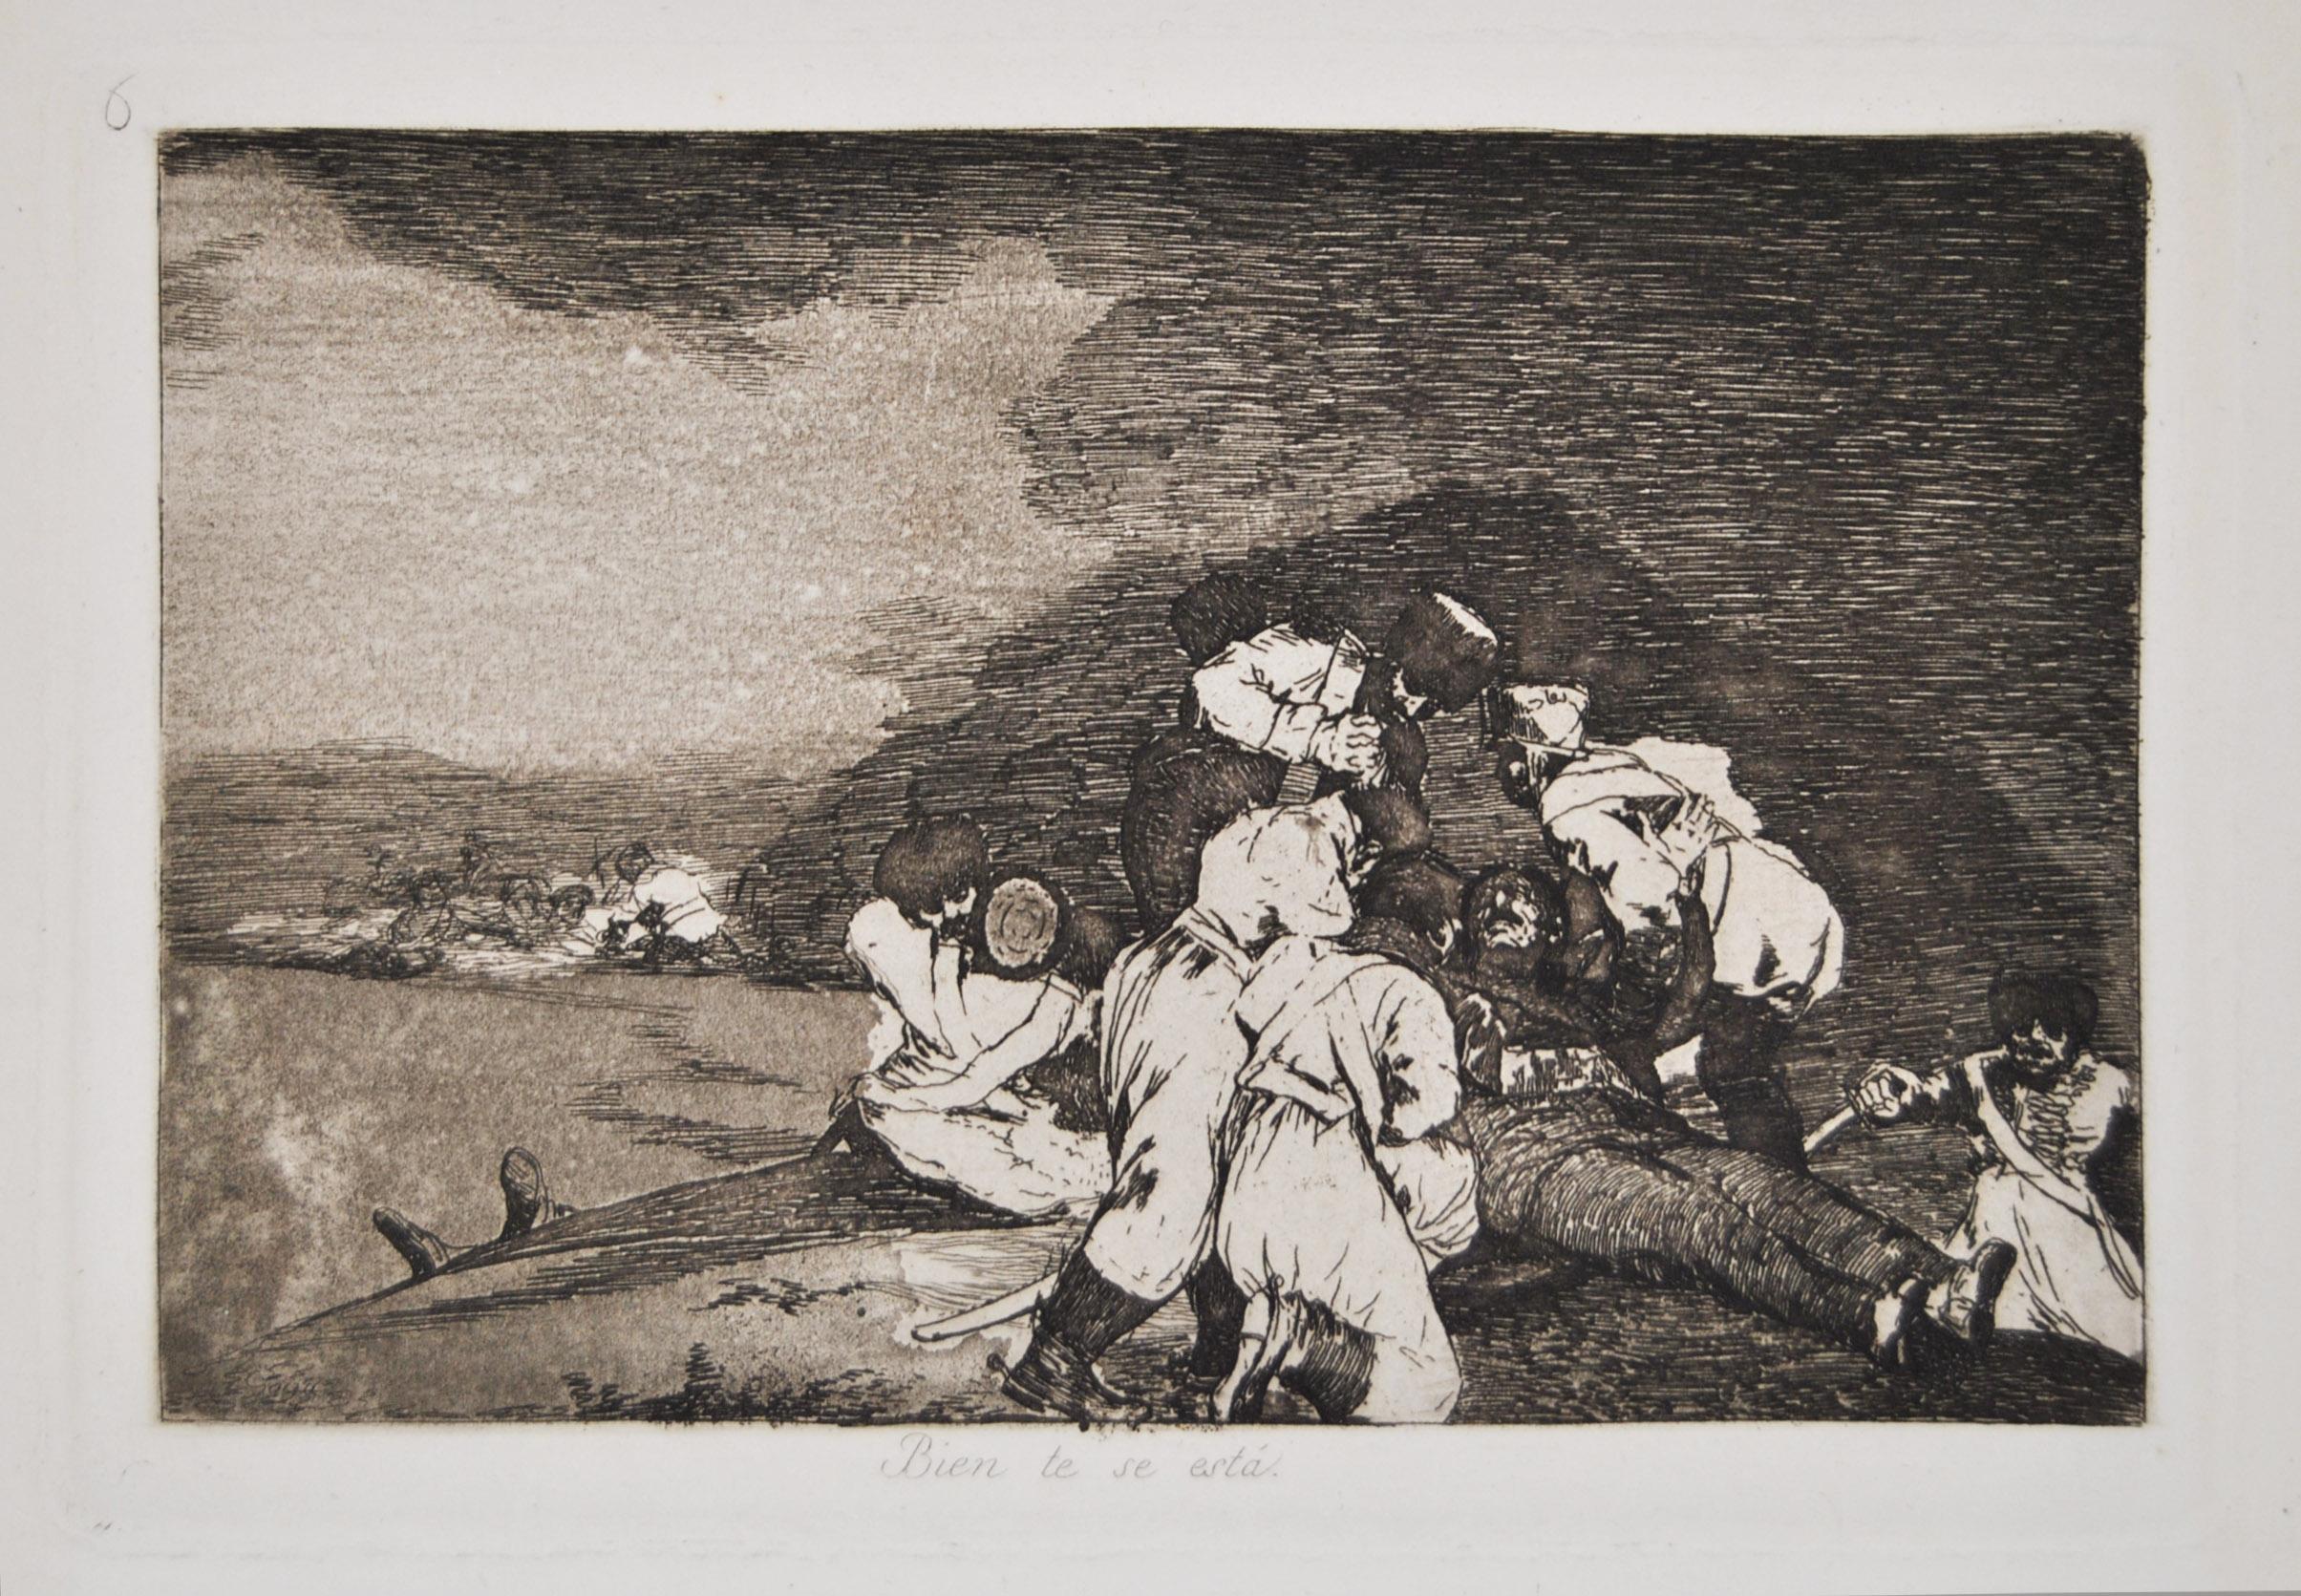 Disasters of War are 80 original aquatint plates realized by Francisco Goya in 1863,  on heavy wove paper with J.G.O. and palmette watermark, publisher cloth backed boards,  Madrid, first edition, Issue B – Oblong 4° - Titlepage, and with two pages